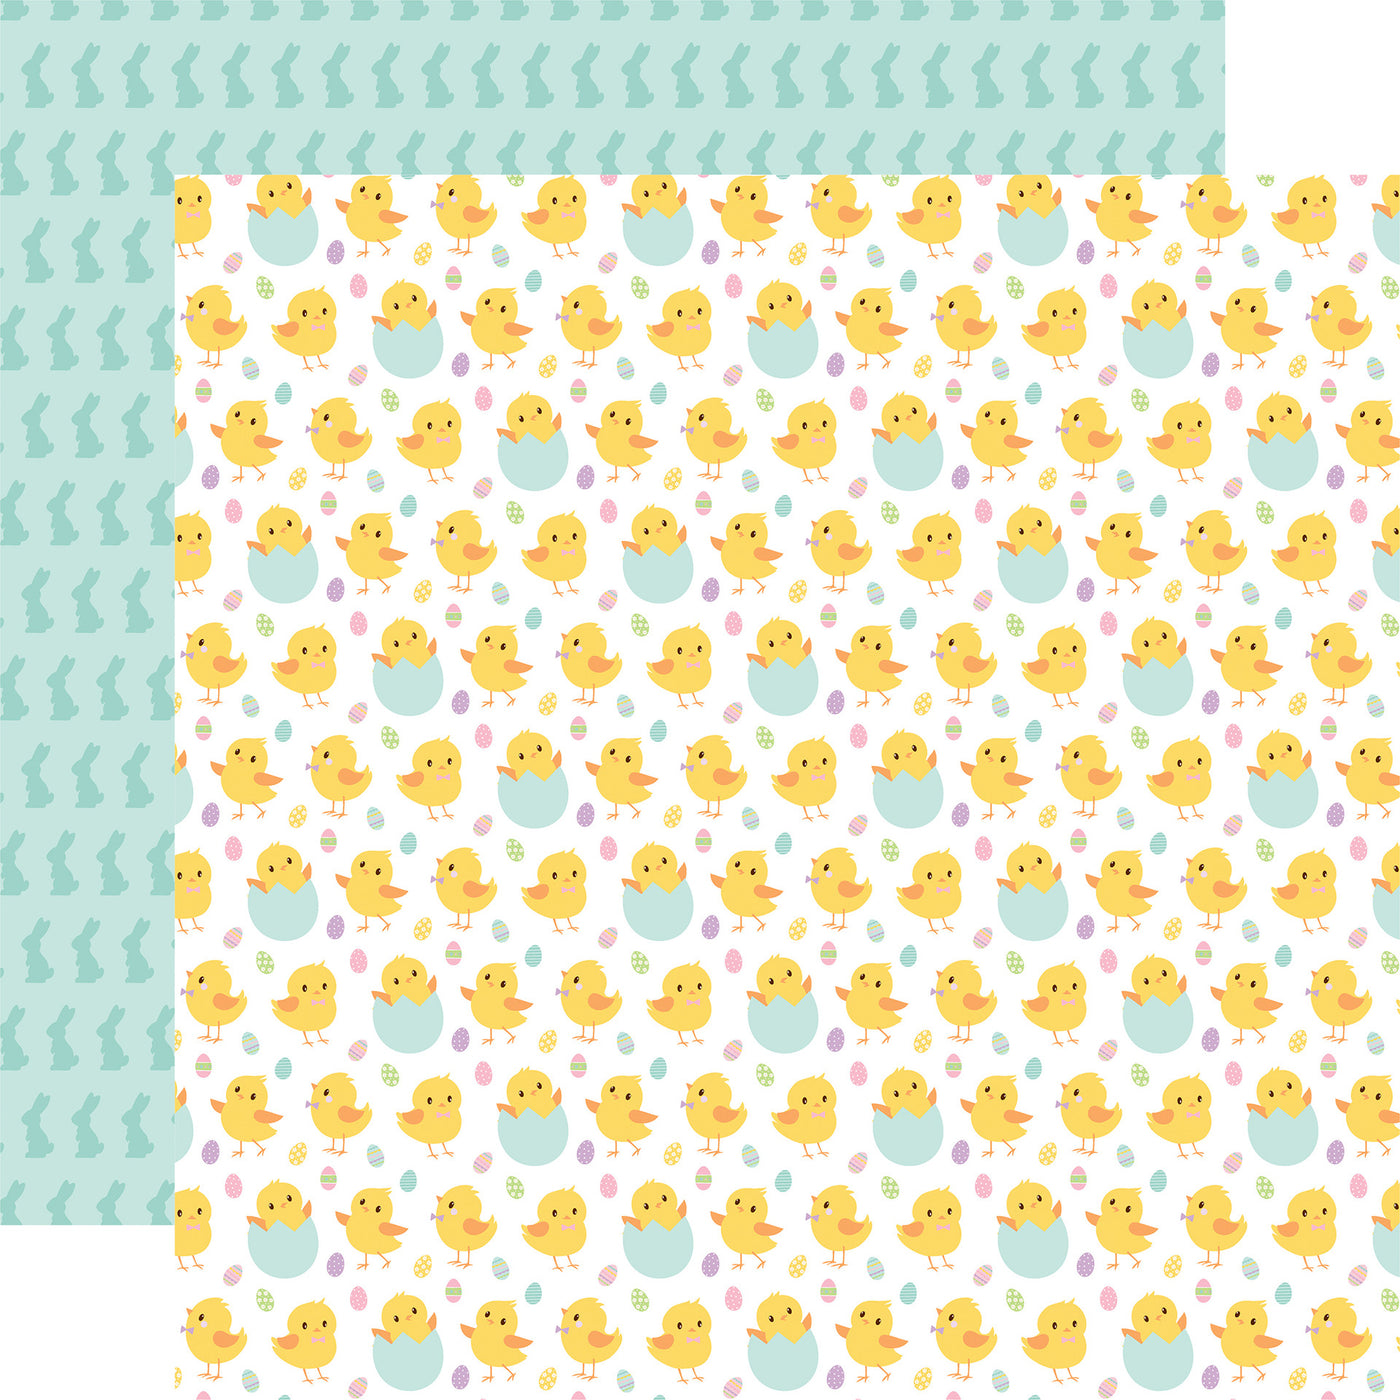 12x12 double-sided patterned paper - (pastel yellow baby chicks in blue eggshells on a white background, teal blue bunny pattern reverse)